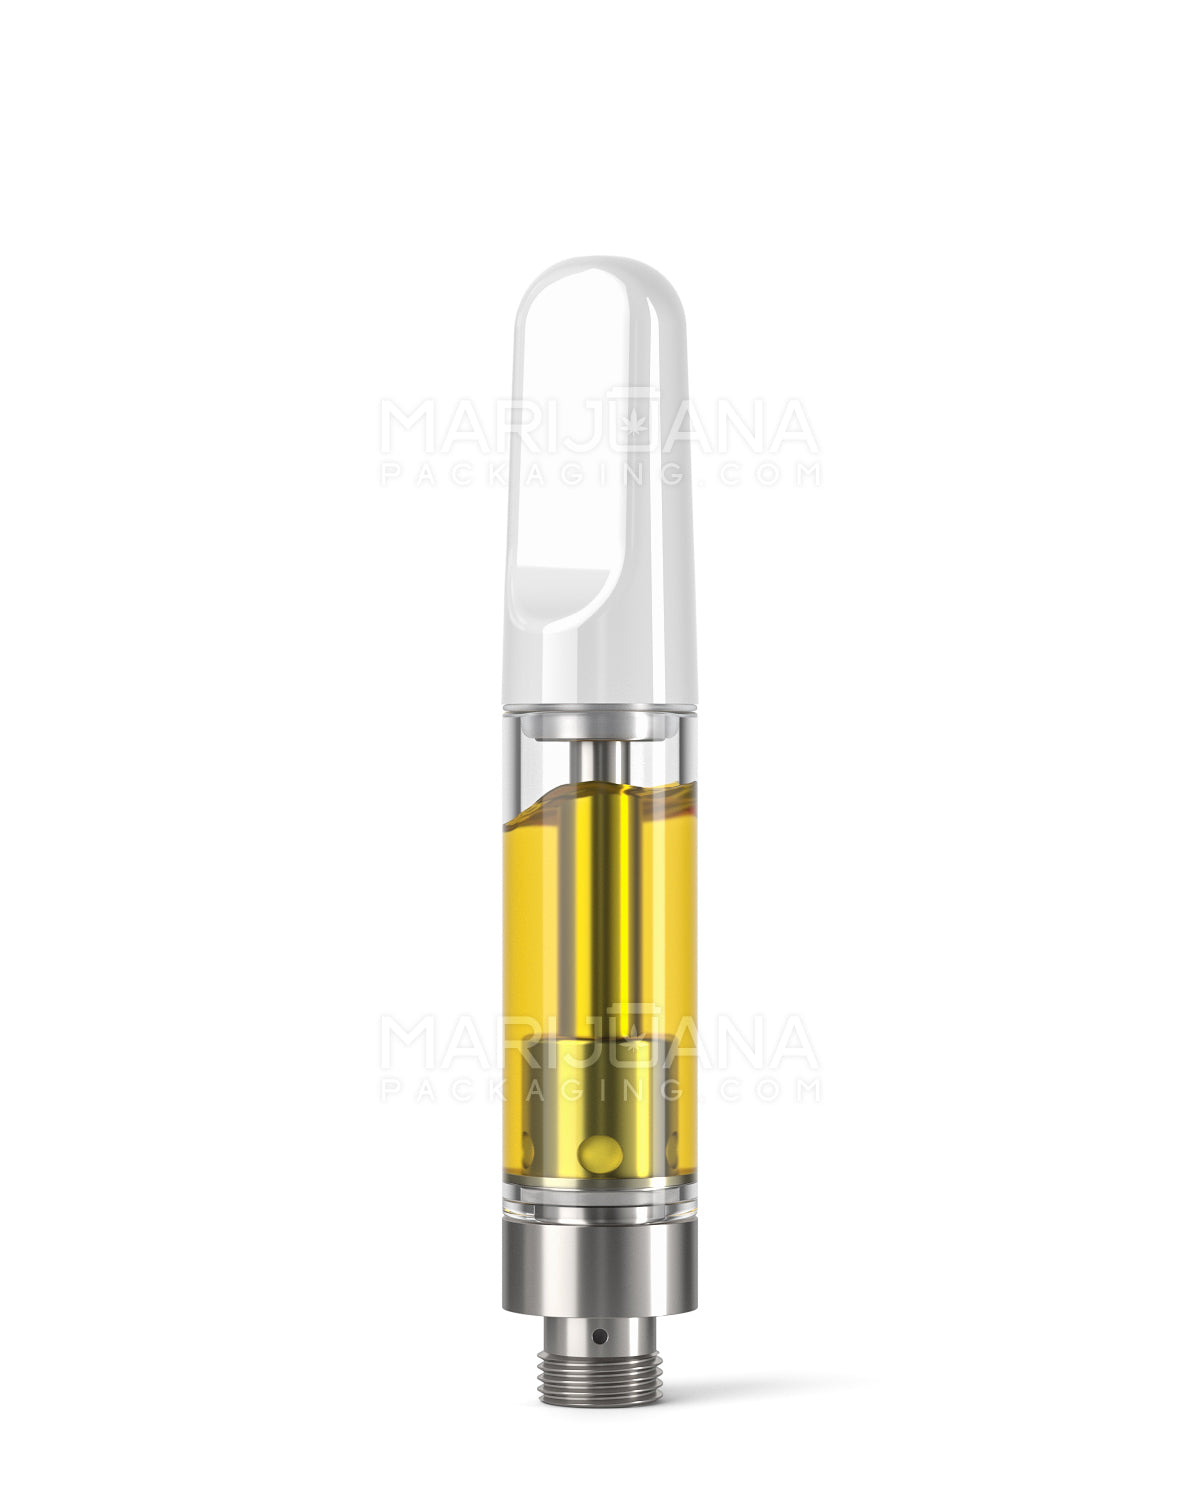 CCELL | Liquid6 Reactor Glass Vape Cartridge with White Ceramic Mouthpiece | 1mL - Screw On - 100 Count - 2